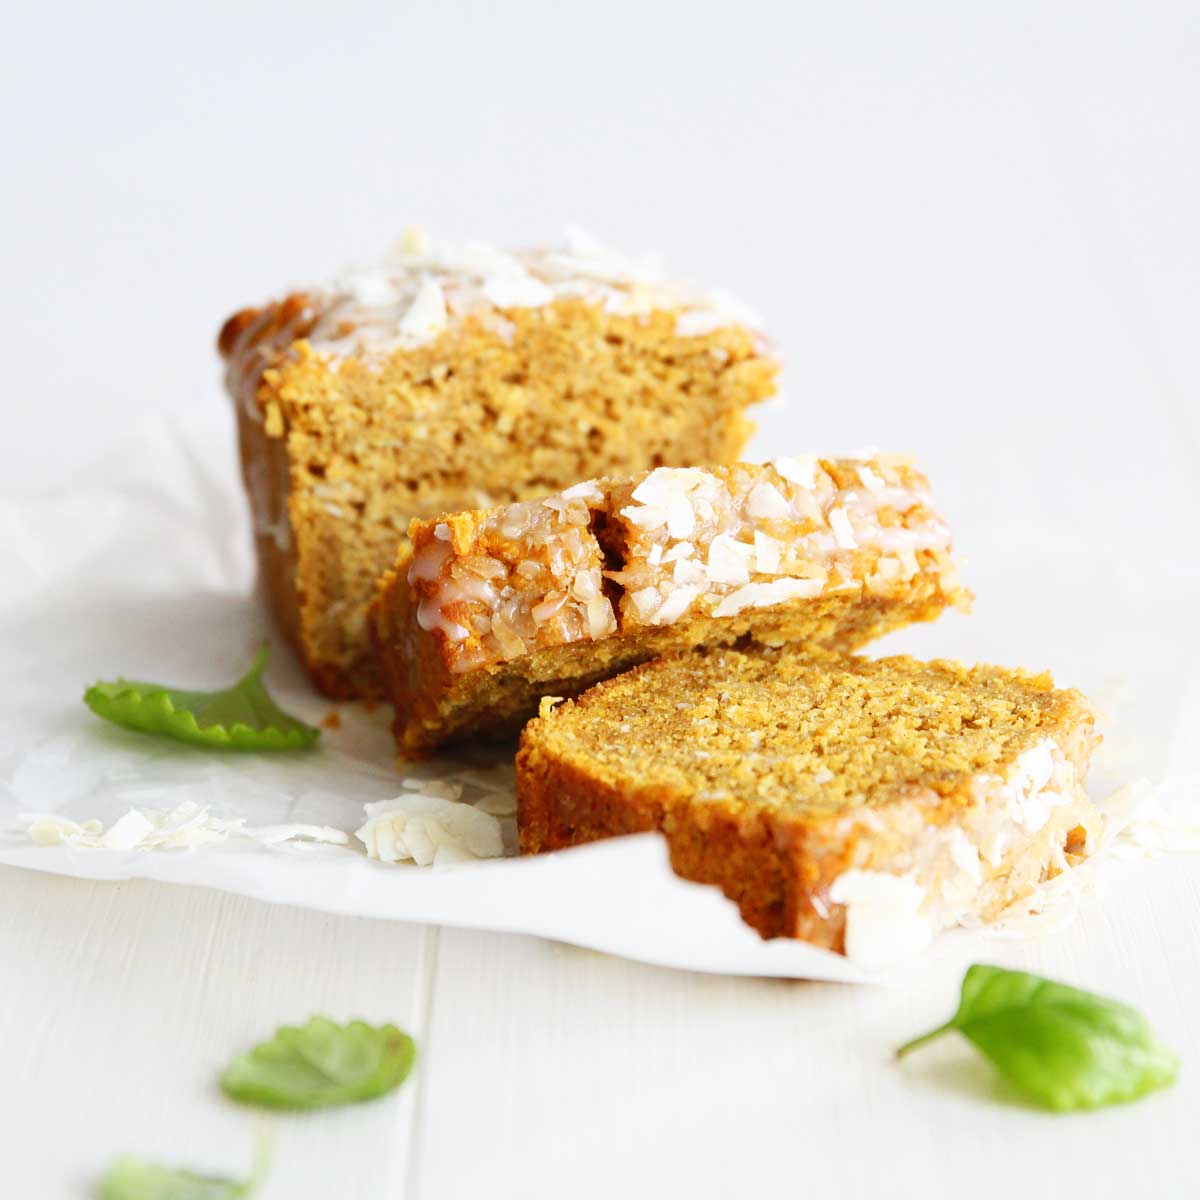 Coconut Pumpkin Bread with Added Almond Flour & Oats - Red Bean Mochi Cake